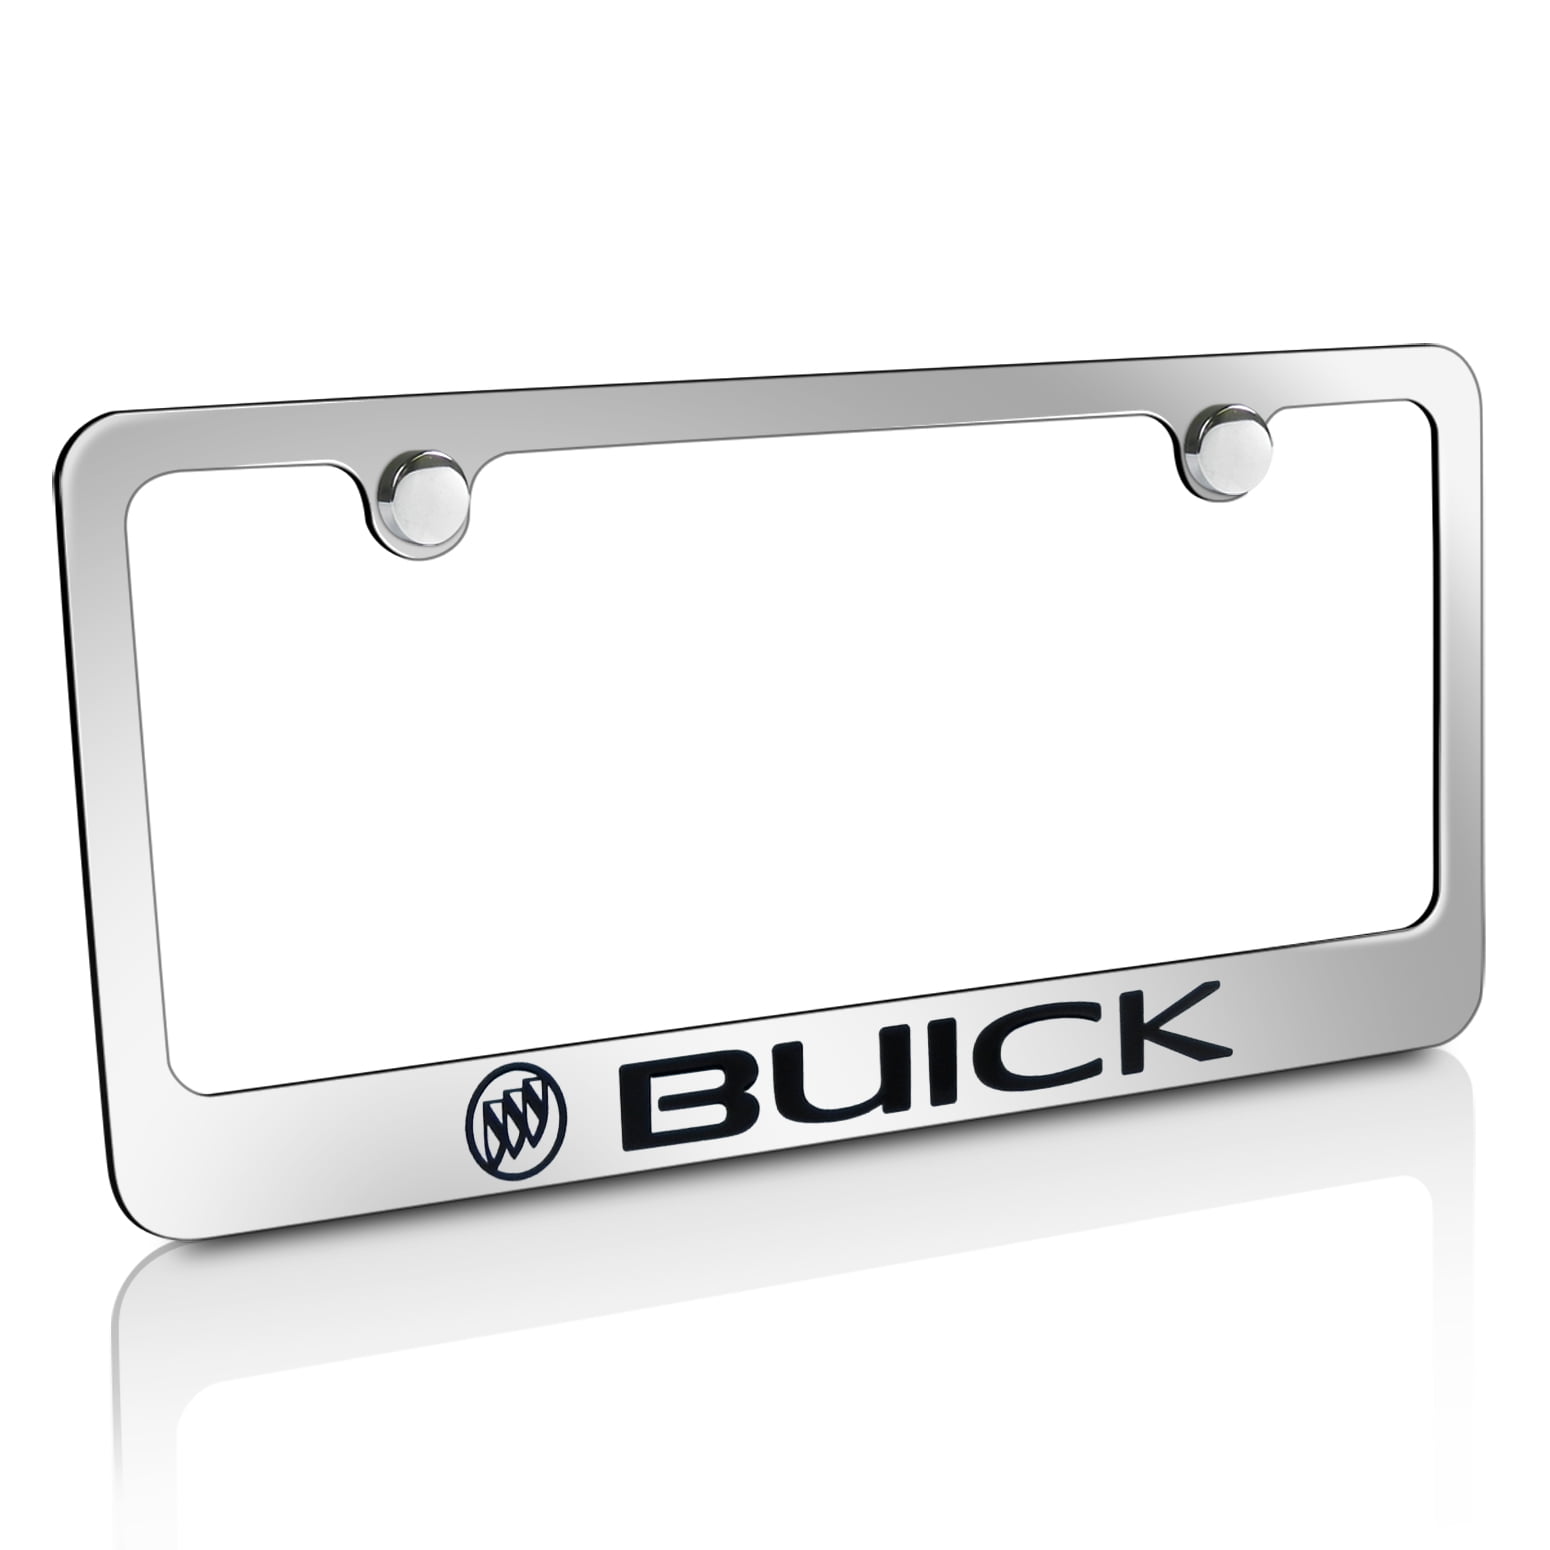 Buick LaCrosse Chrome Plated Metal Top Engraved License Plate Frame Holder